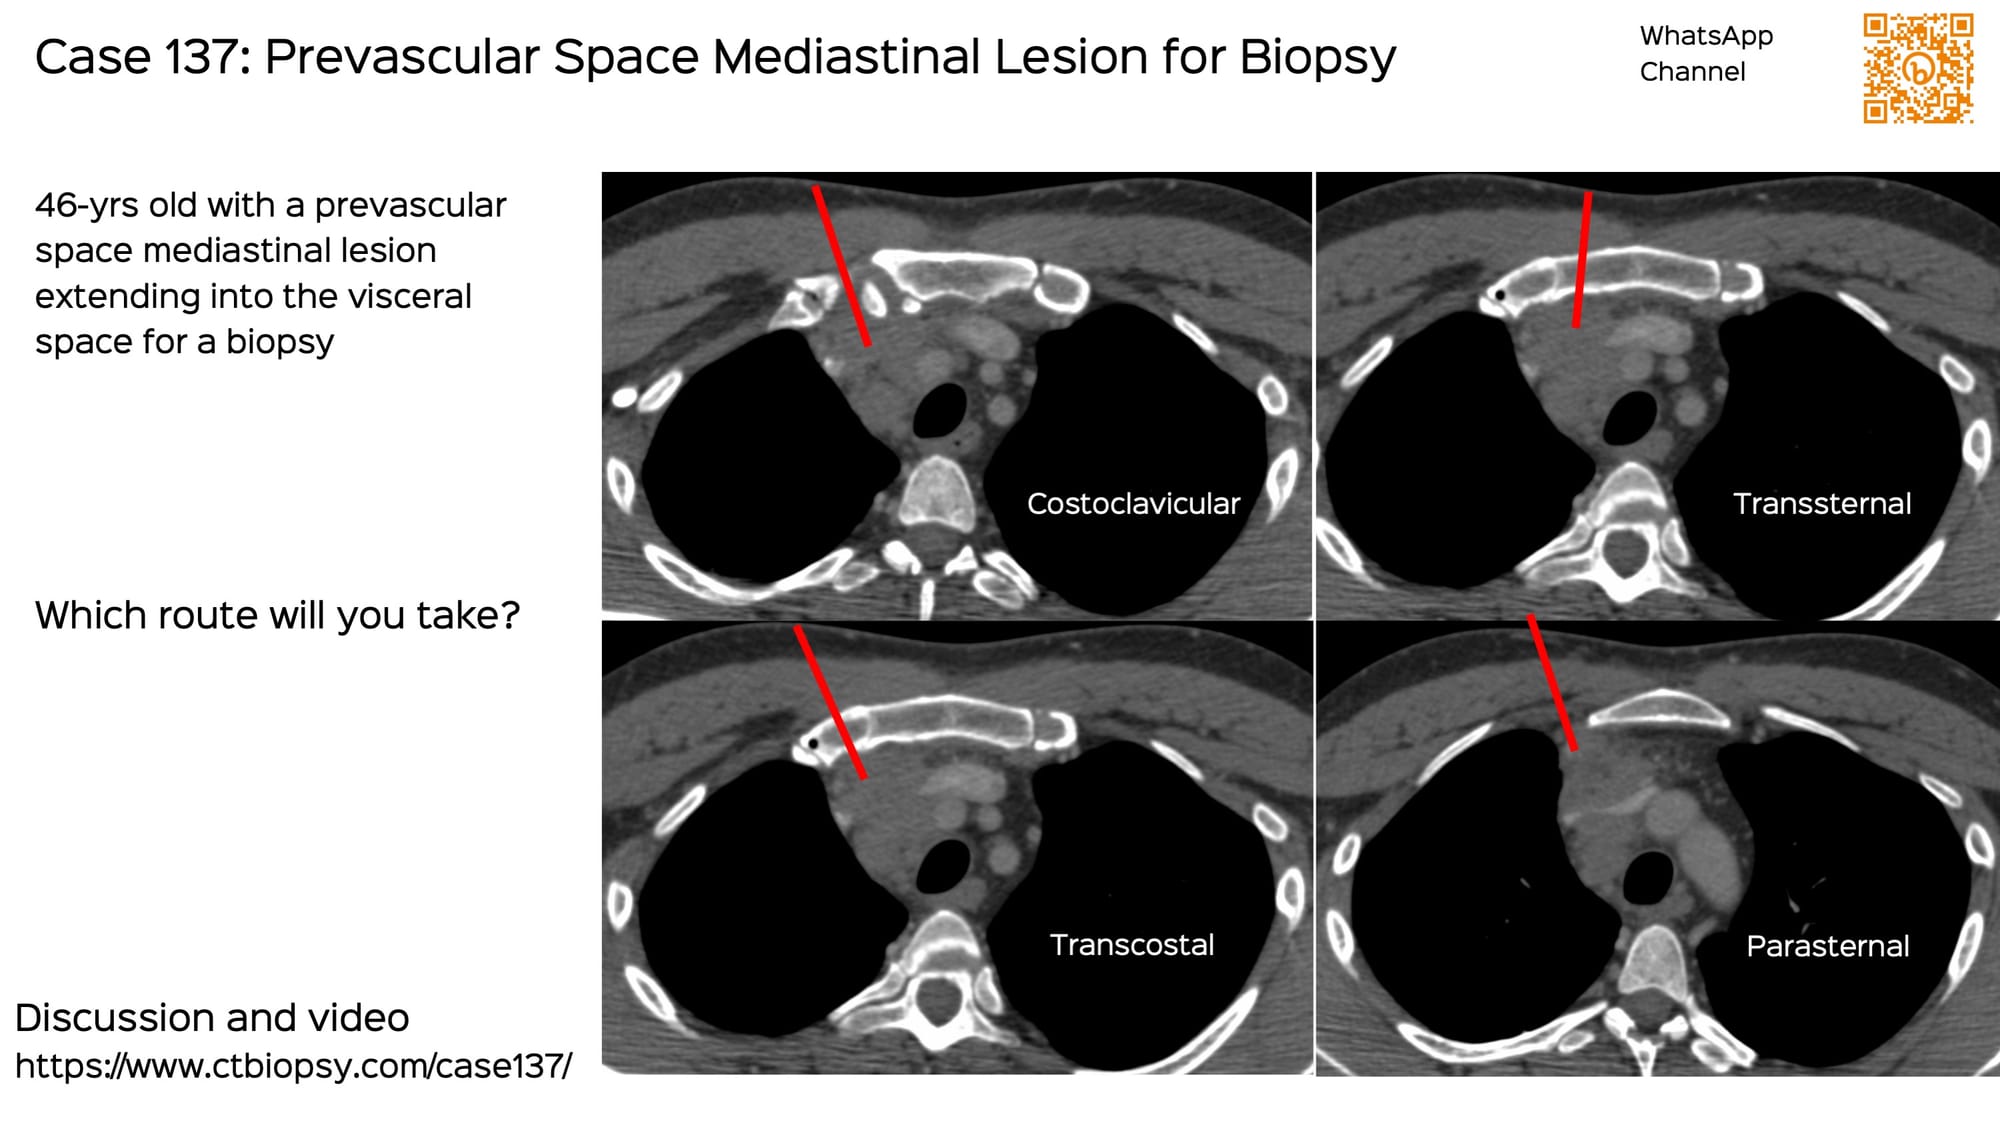 Case 137: Prevascular Space Mediastinal Lesion for Biopsy - What is Your Approach?